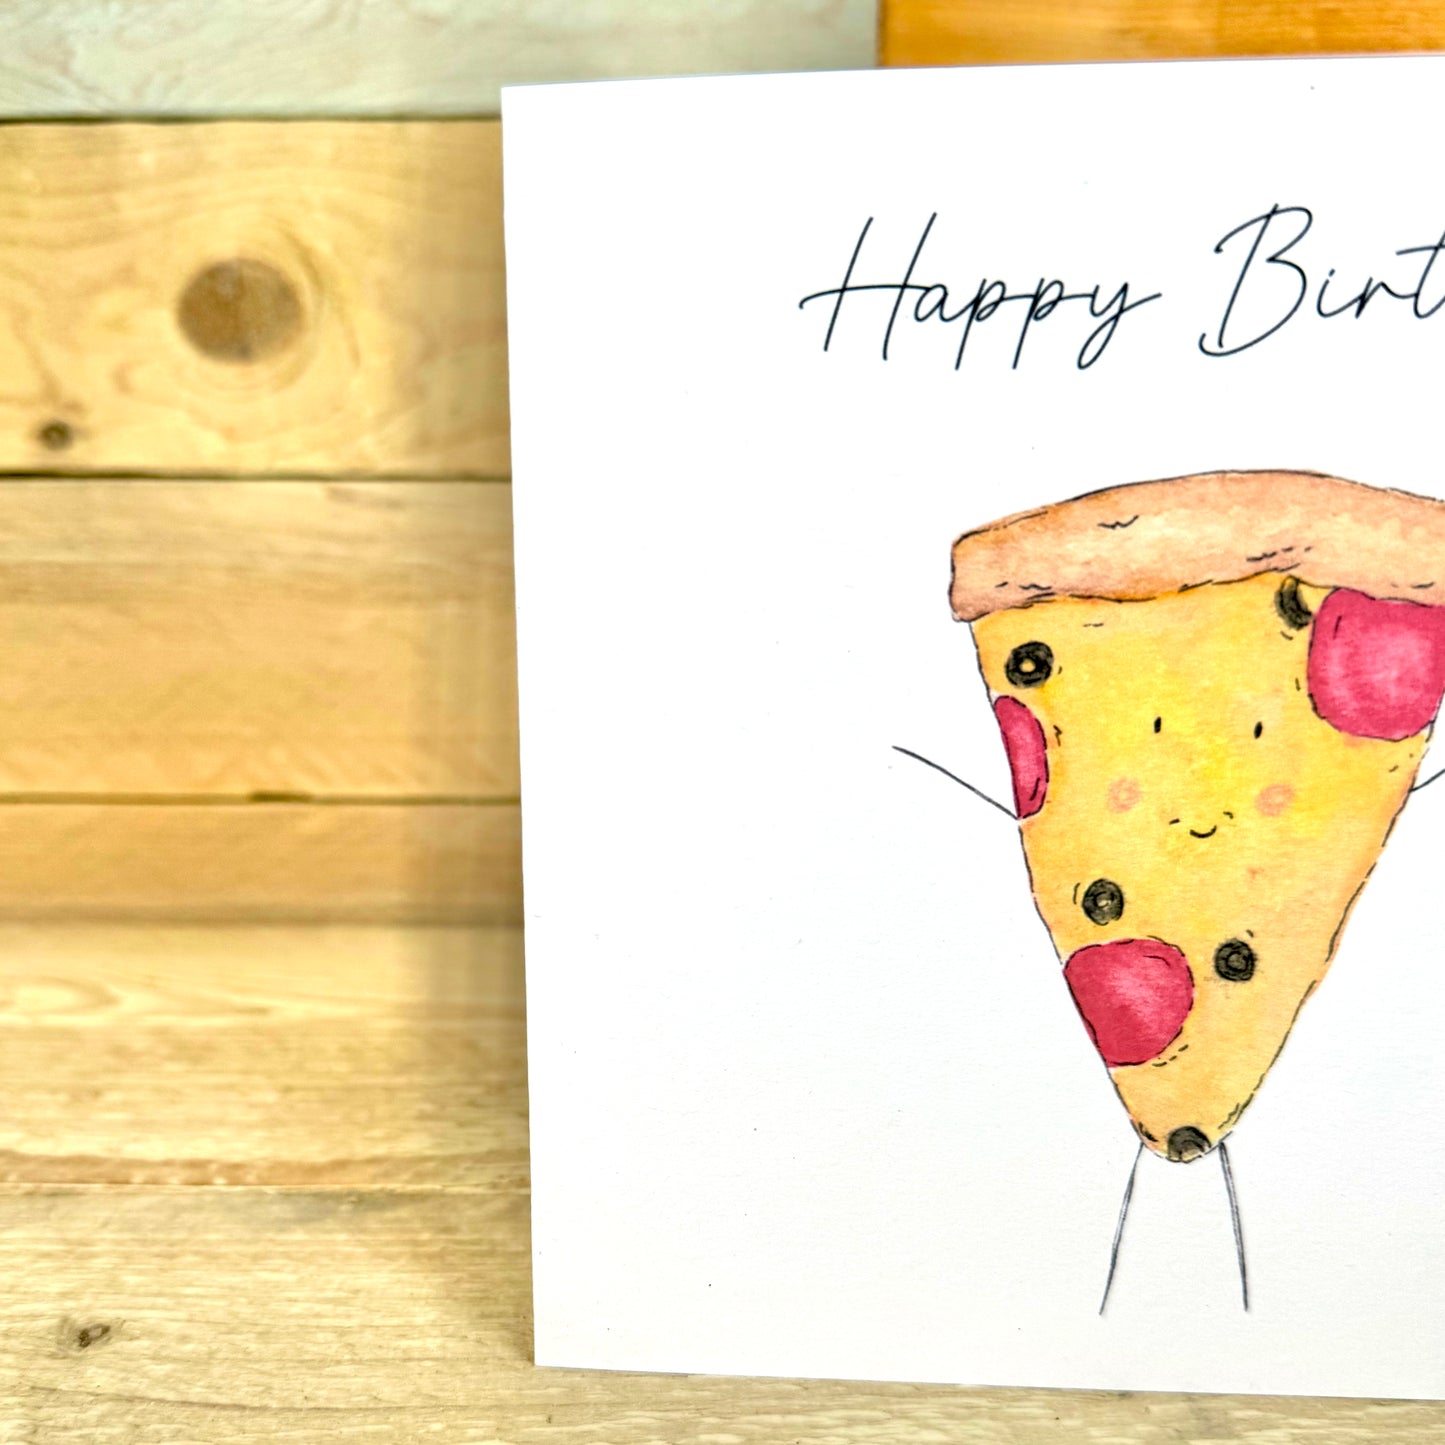 Paolo the Pizza Pie Birthday Card